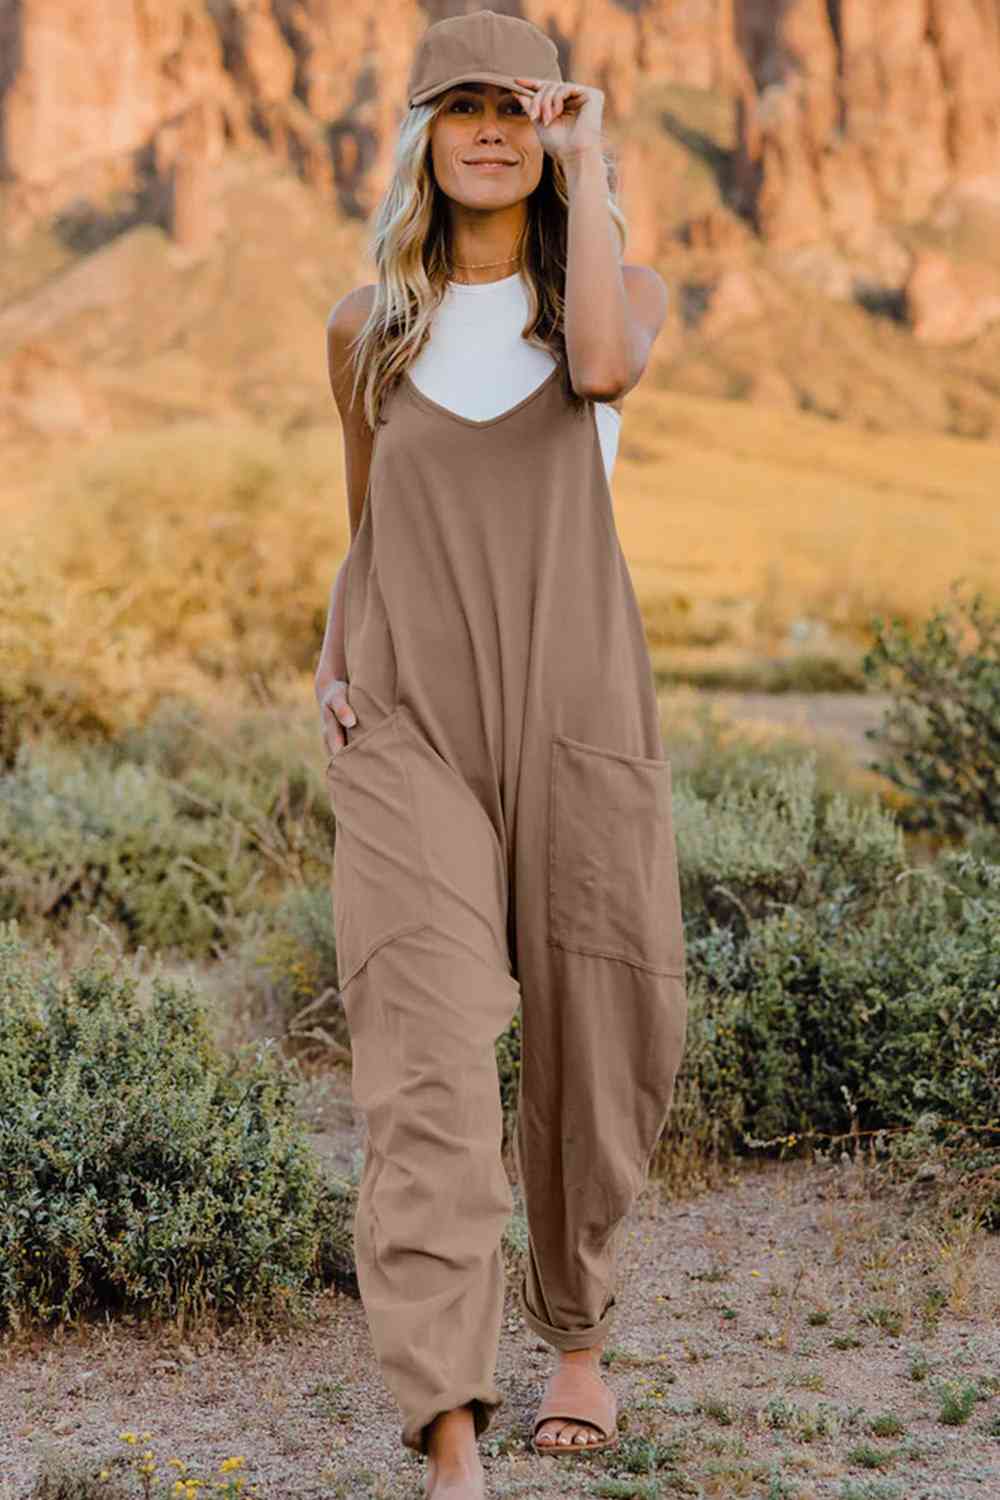 Trendy V-Neck Sleeveless Jumpsuit with Pockets Casual Chic for Women Double Take Design